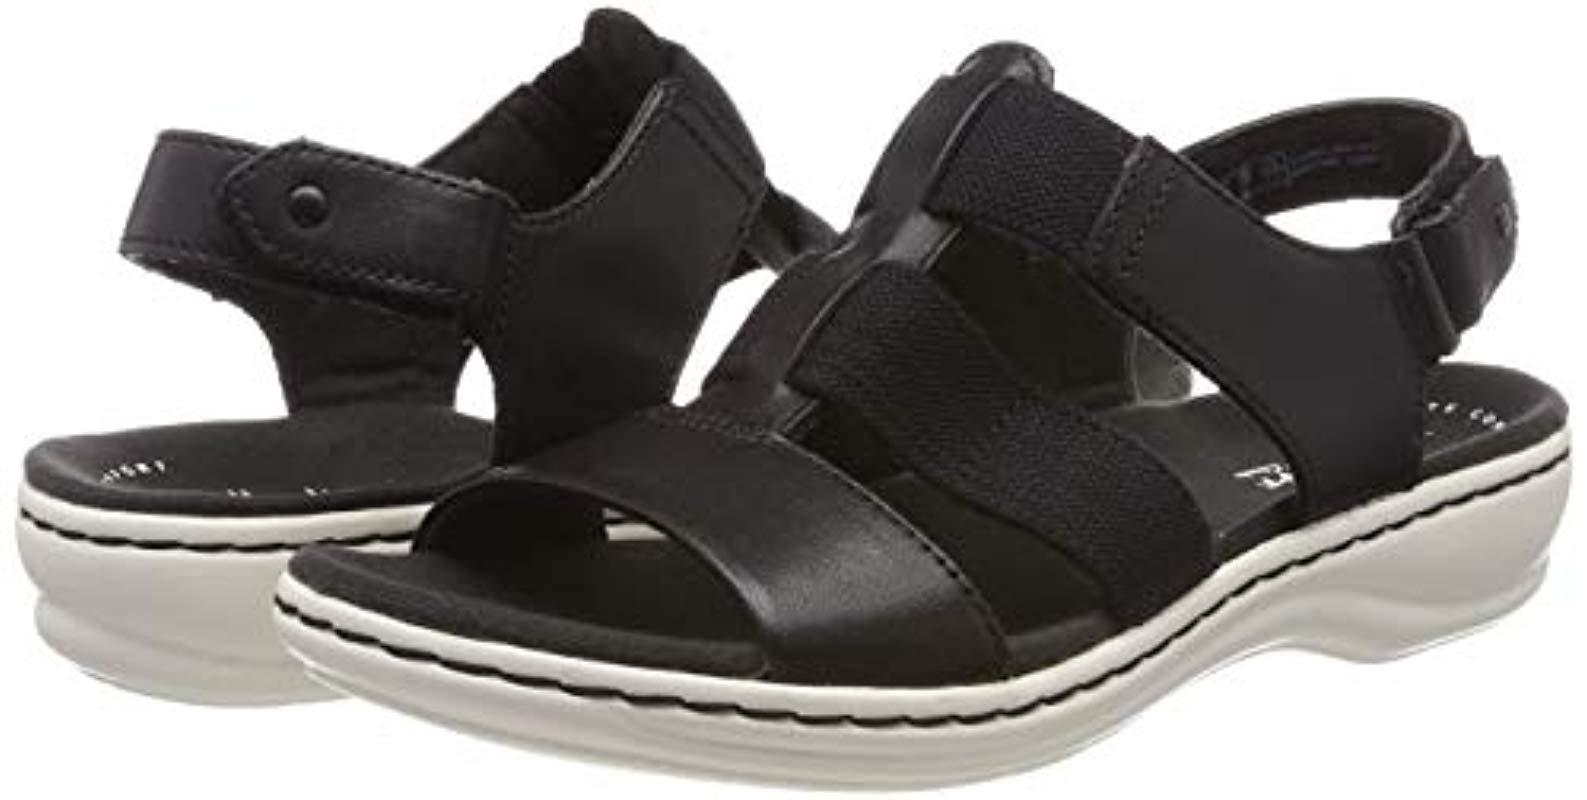 Clarks Leisa Brody Leather Sandals In Black - Lyst